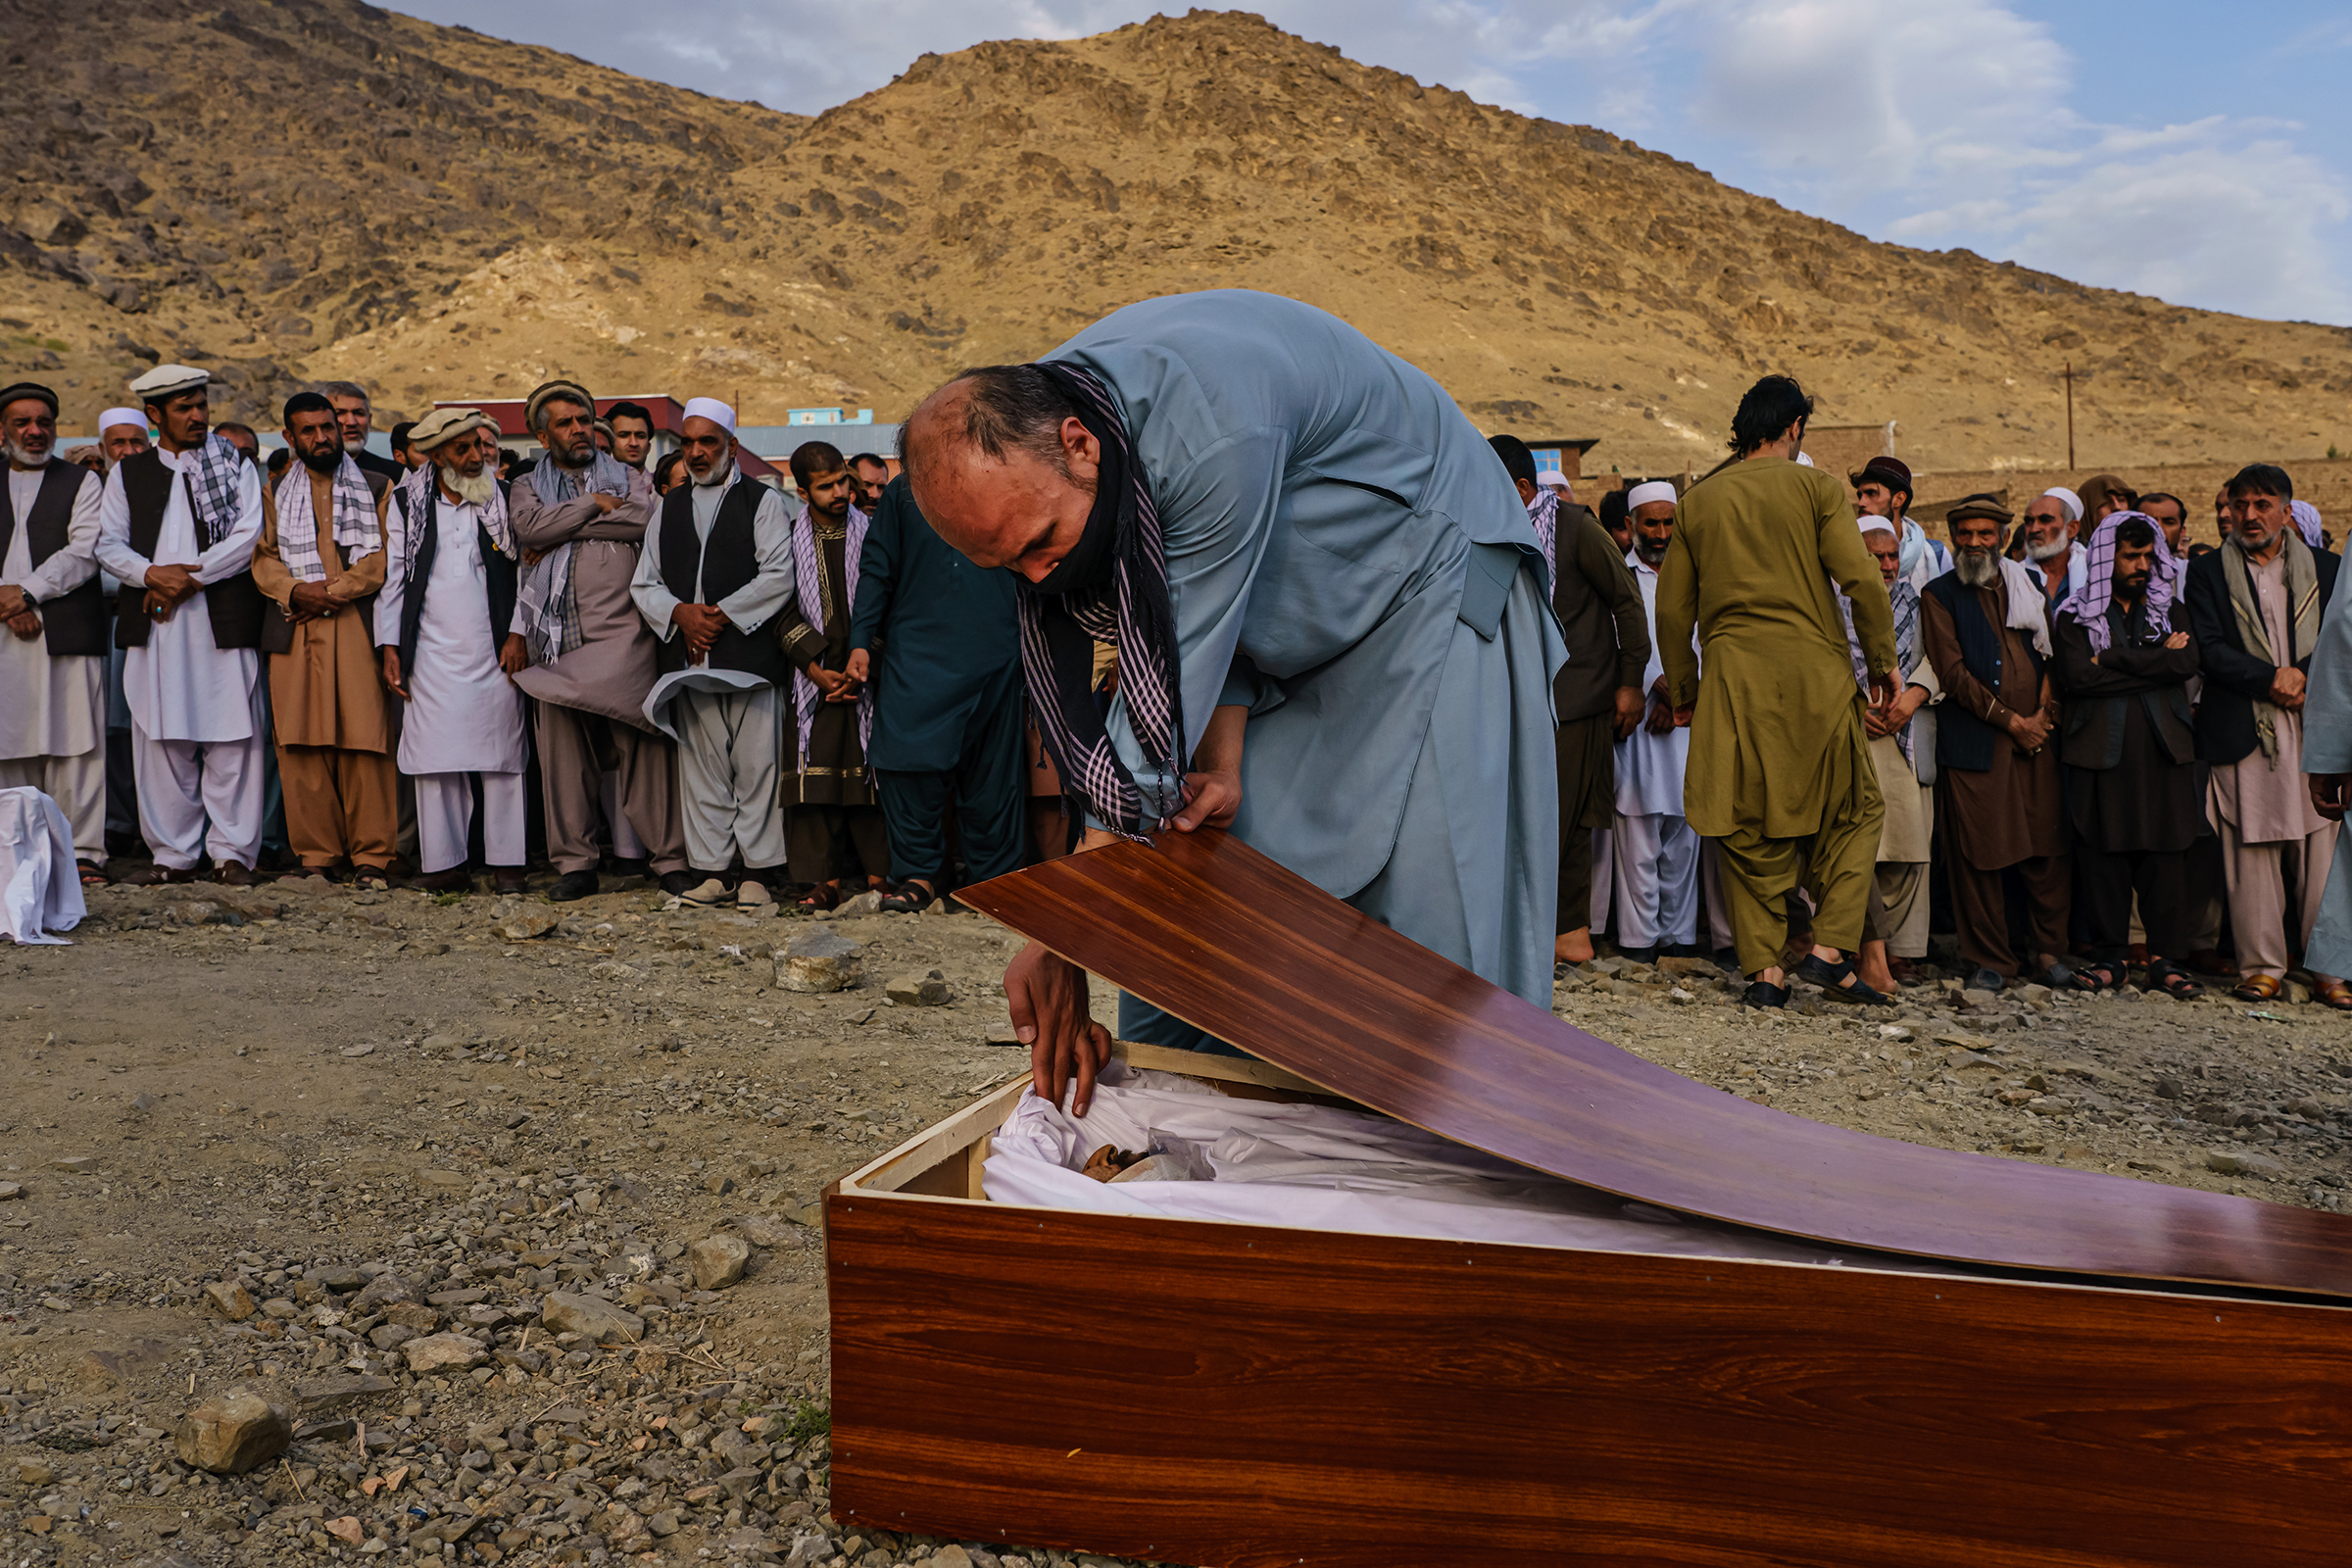 A man bids farewell to Zamarai Ahmadi in his casket during a mass funeral in Kabul on Aug. 30, 2021. (Marcus Yam—Los Angeles Times/Getty Images)